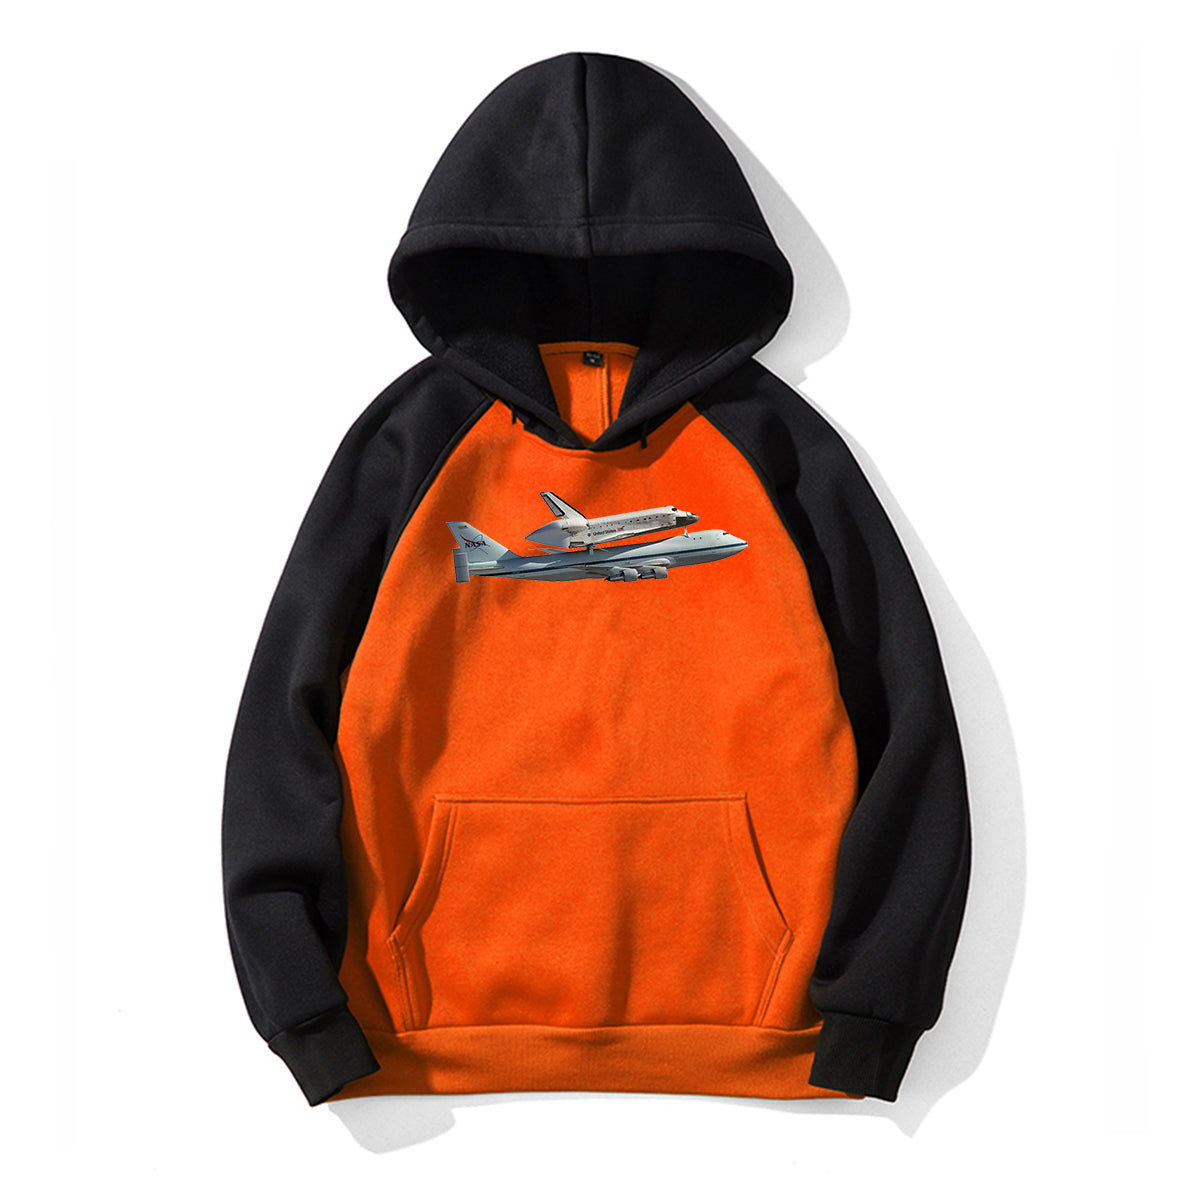 Space shuttle on 747 Designed Colourful Hoodies